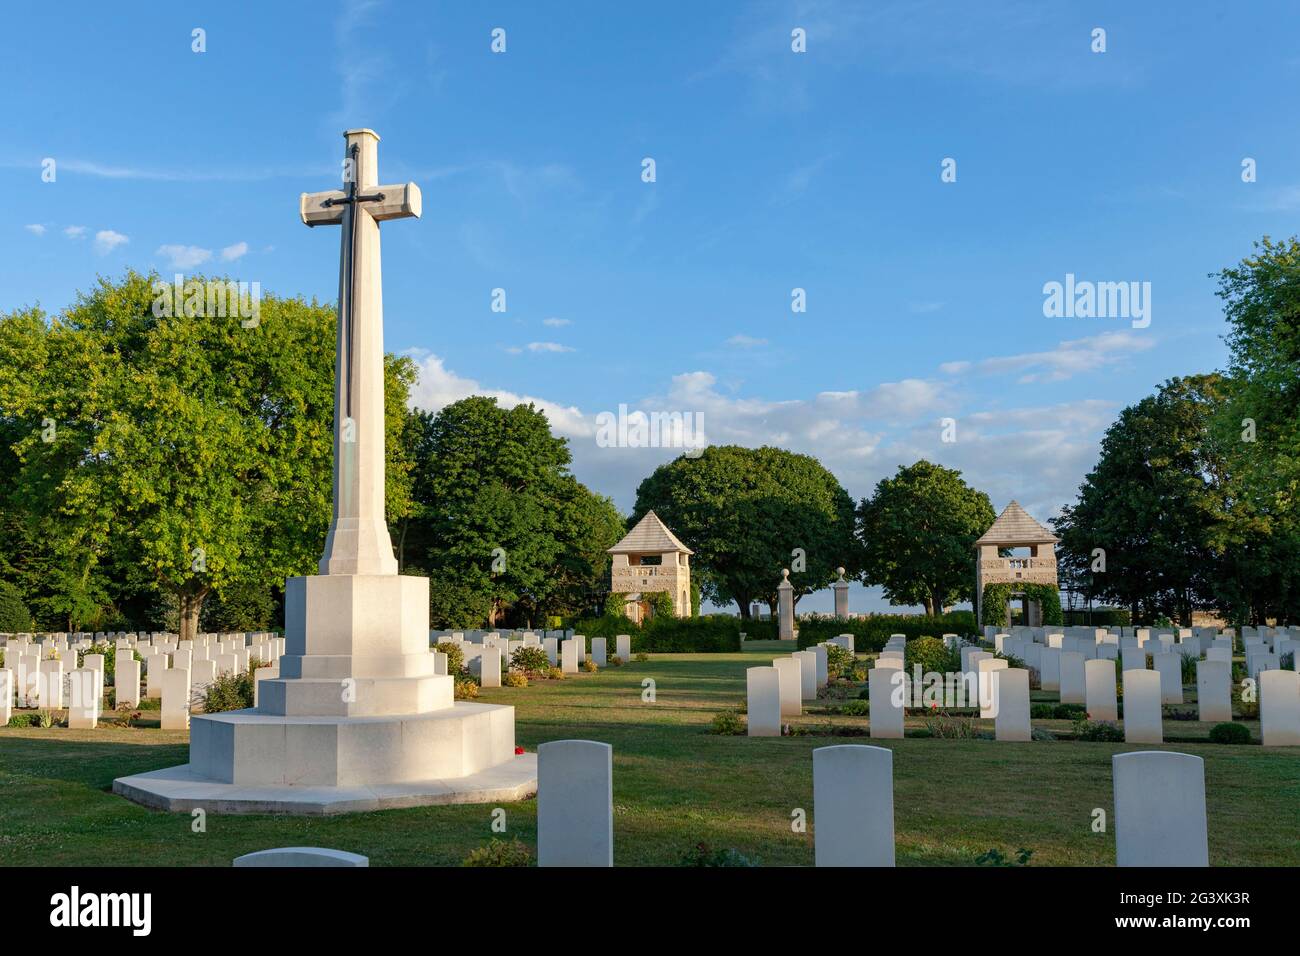 The Beny sur Mer Canadian War Cemetery containing predominantly Canadian soldiers killed during the early stages of the Battle of Normandy in the Seco Stock Photo